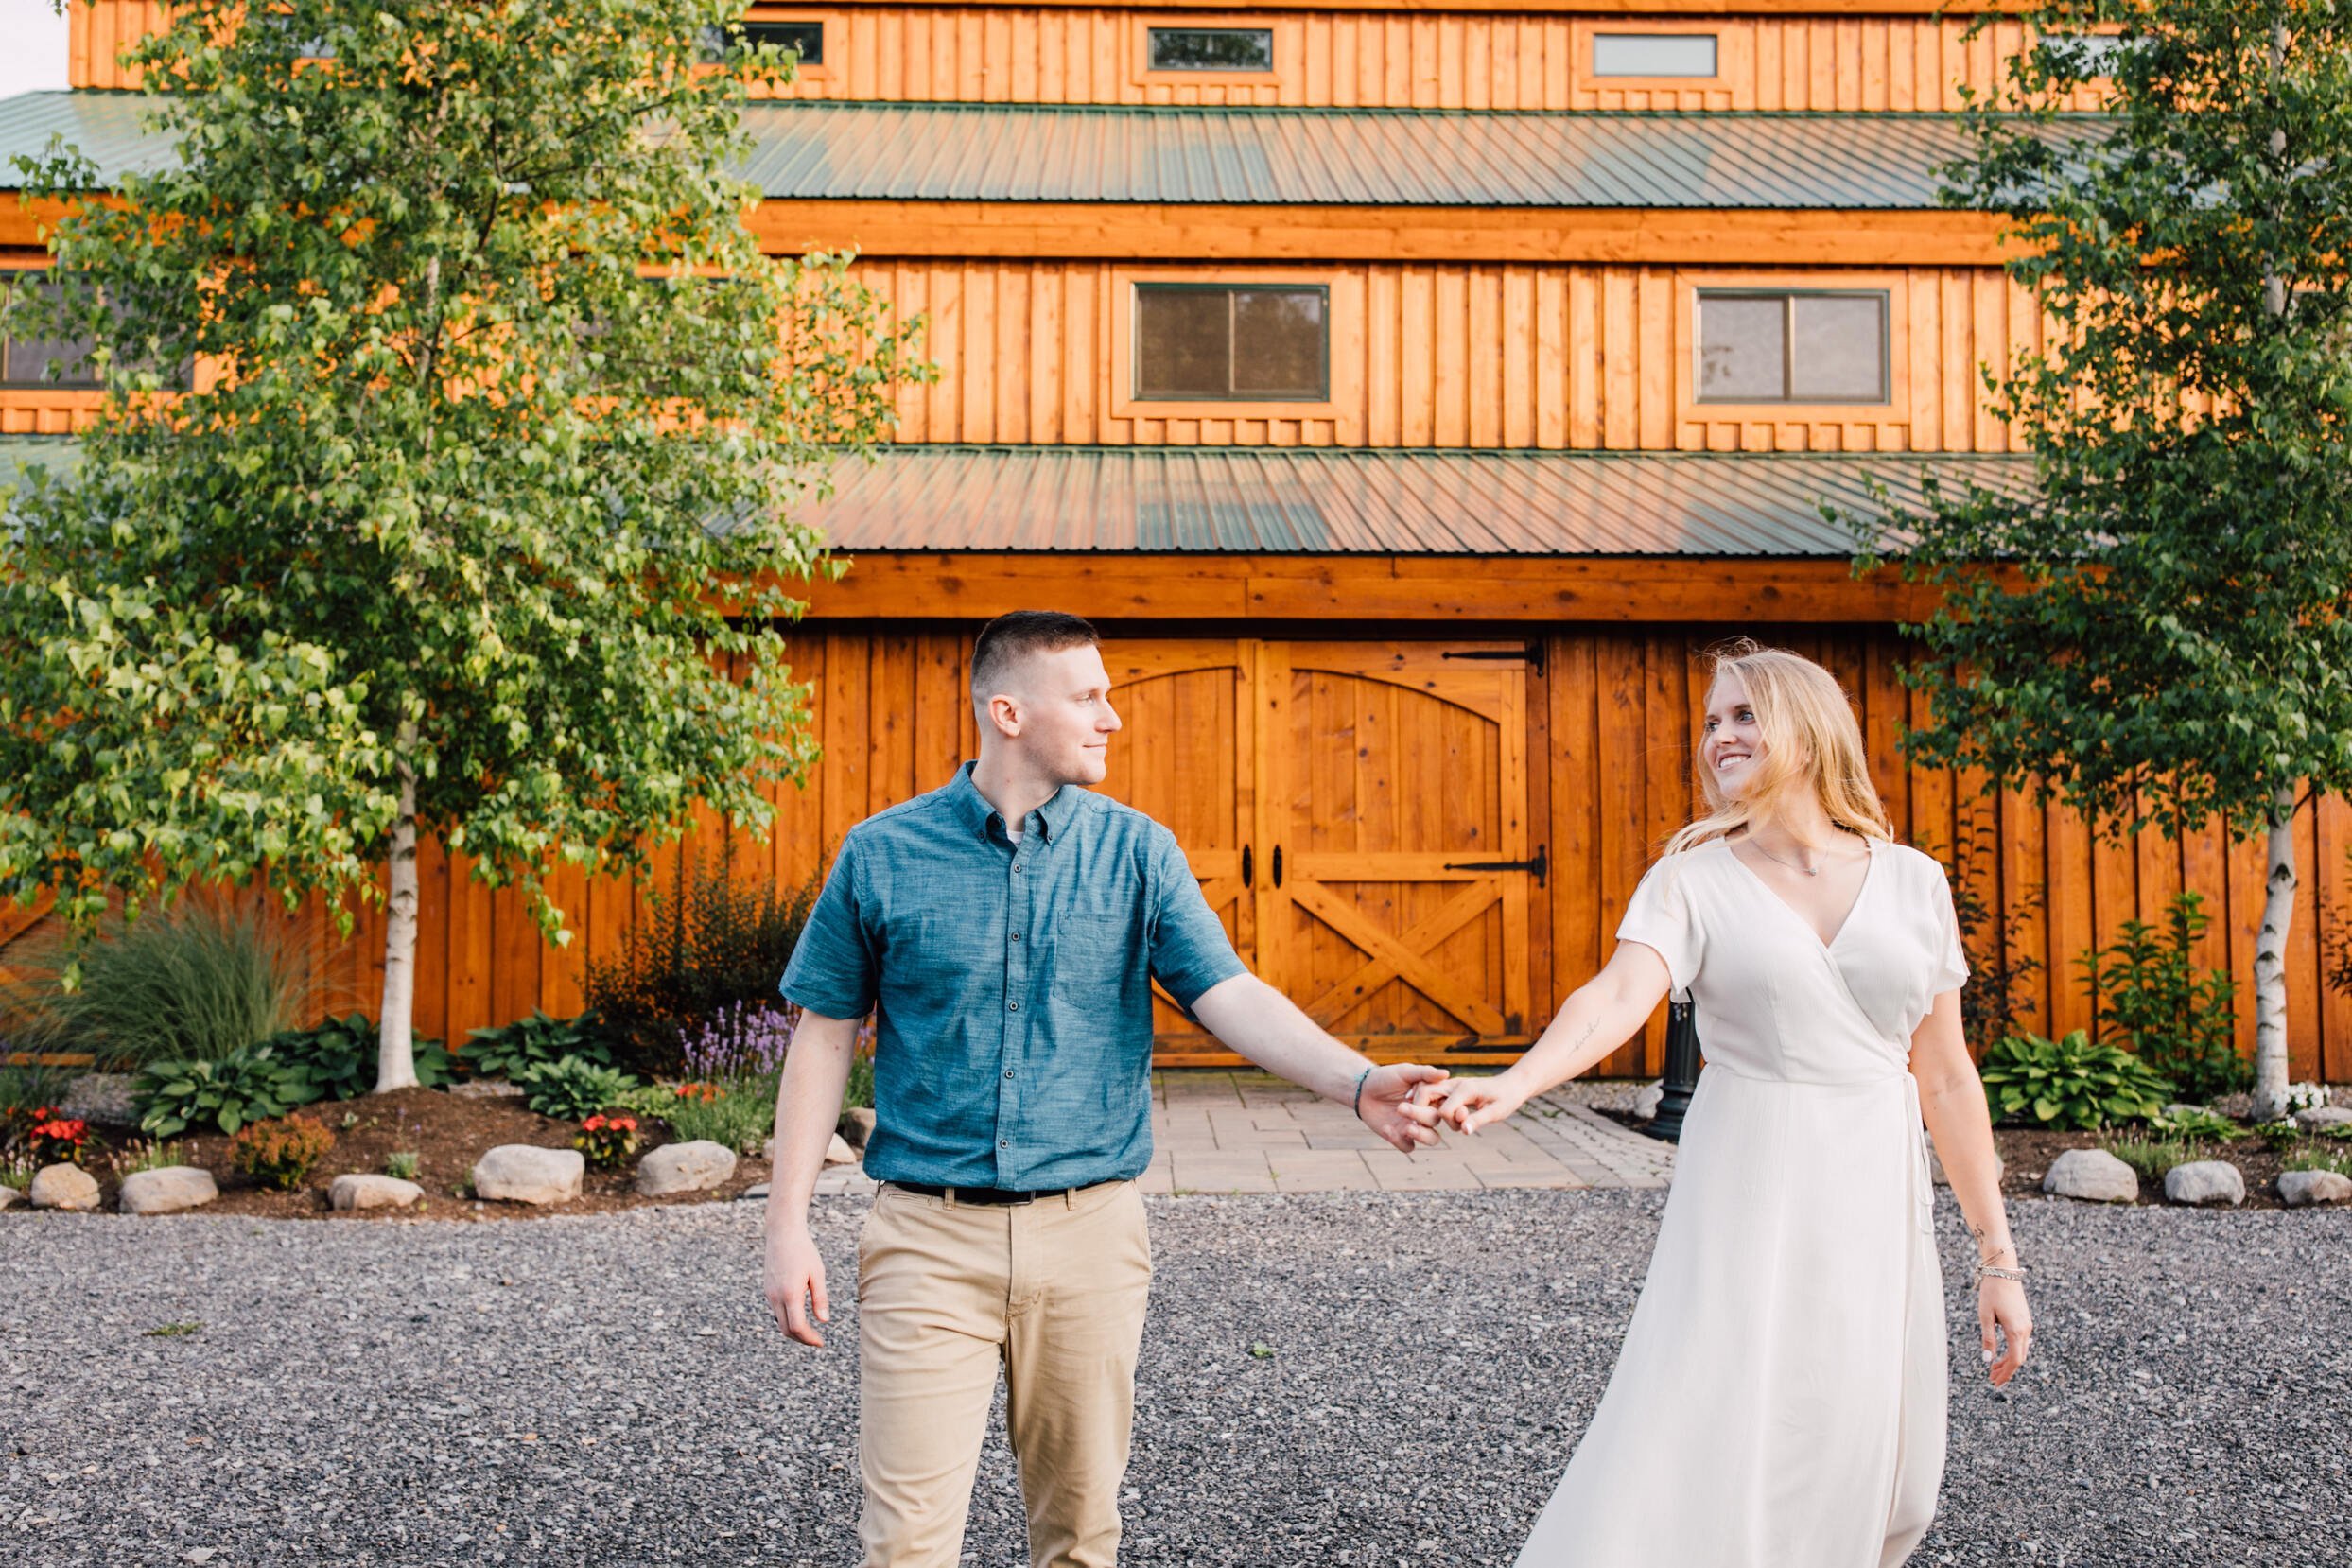  Engaged couple swing their entwined hands in front of a barn during their farm engagement photos 